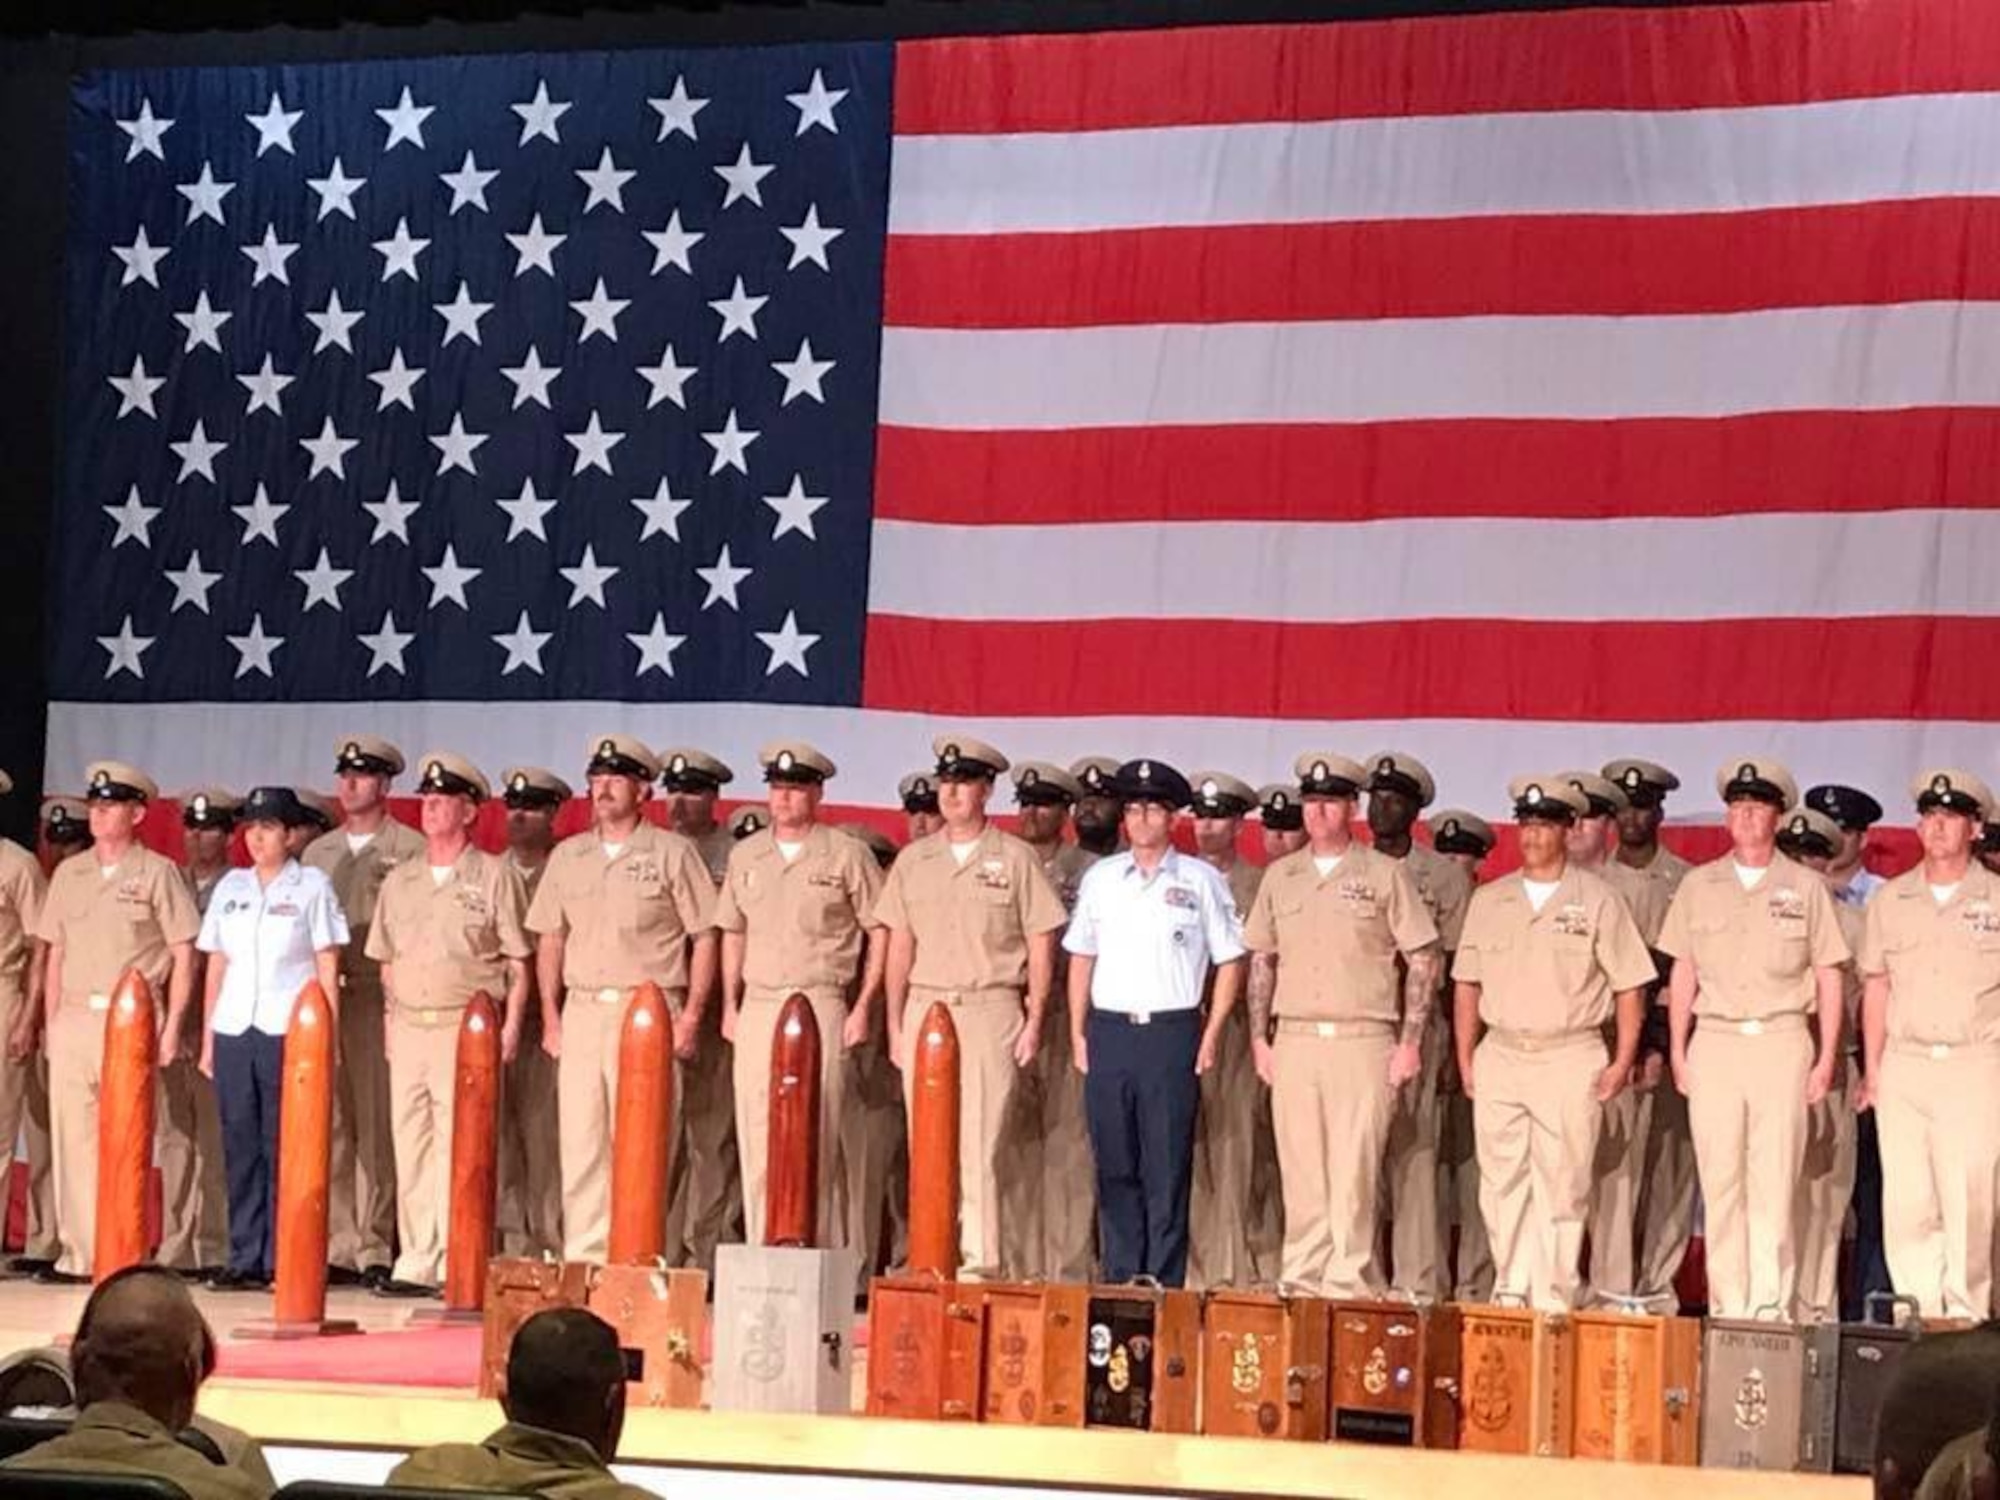 Military members participate in the Navy Chief Petty Officer Course graduation Sept. 15, 2017, on Naval Construction Battalion Center, Mississippi. The six-week long Navy Chief Petty Officer Courses held at Keesler and the Naval Construction Battalion Center in Gulfport, Mississippi included four Air Force members, which is the first time Keesler Air Force members have gone through this process. The course is meant to enhance leadership skills and to strengthen the Navy-Air Force enlisted leadership relationship on Keesler. (Courtesy photo)